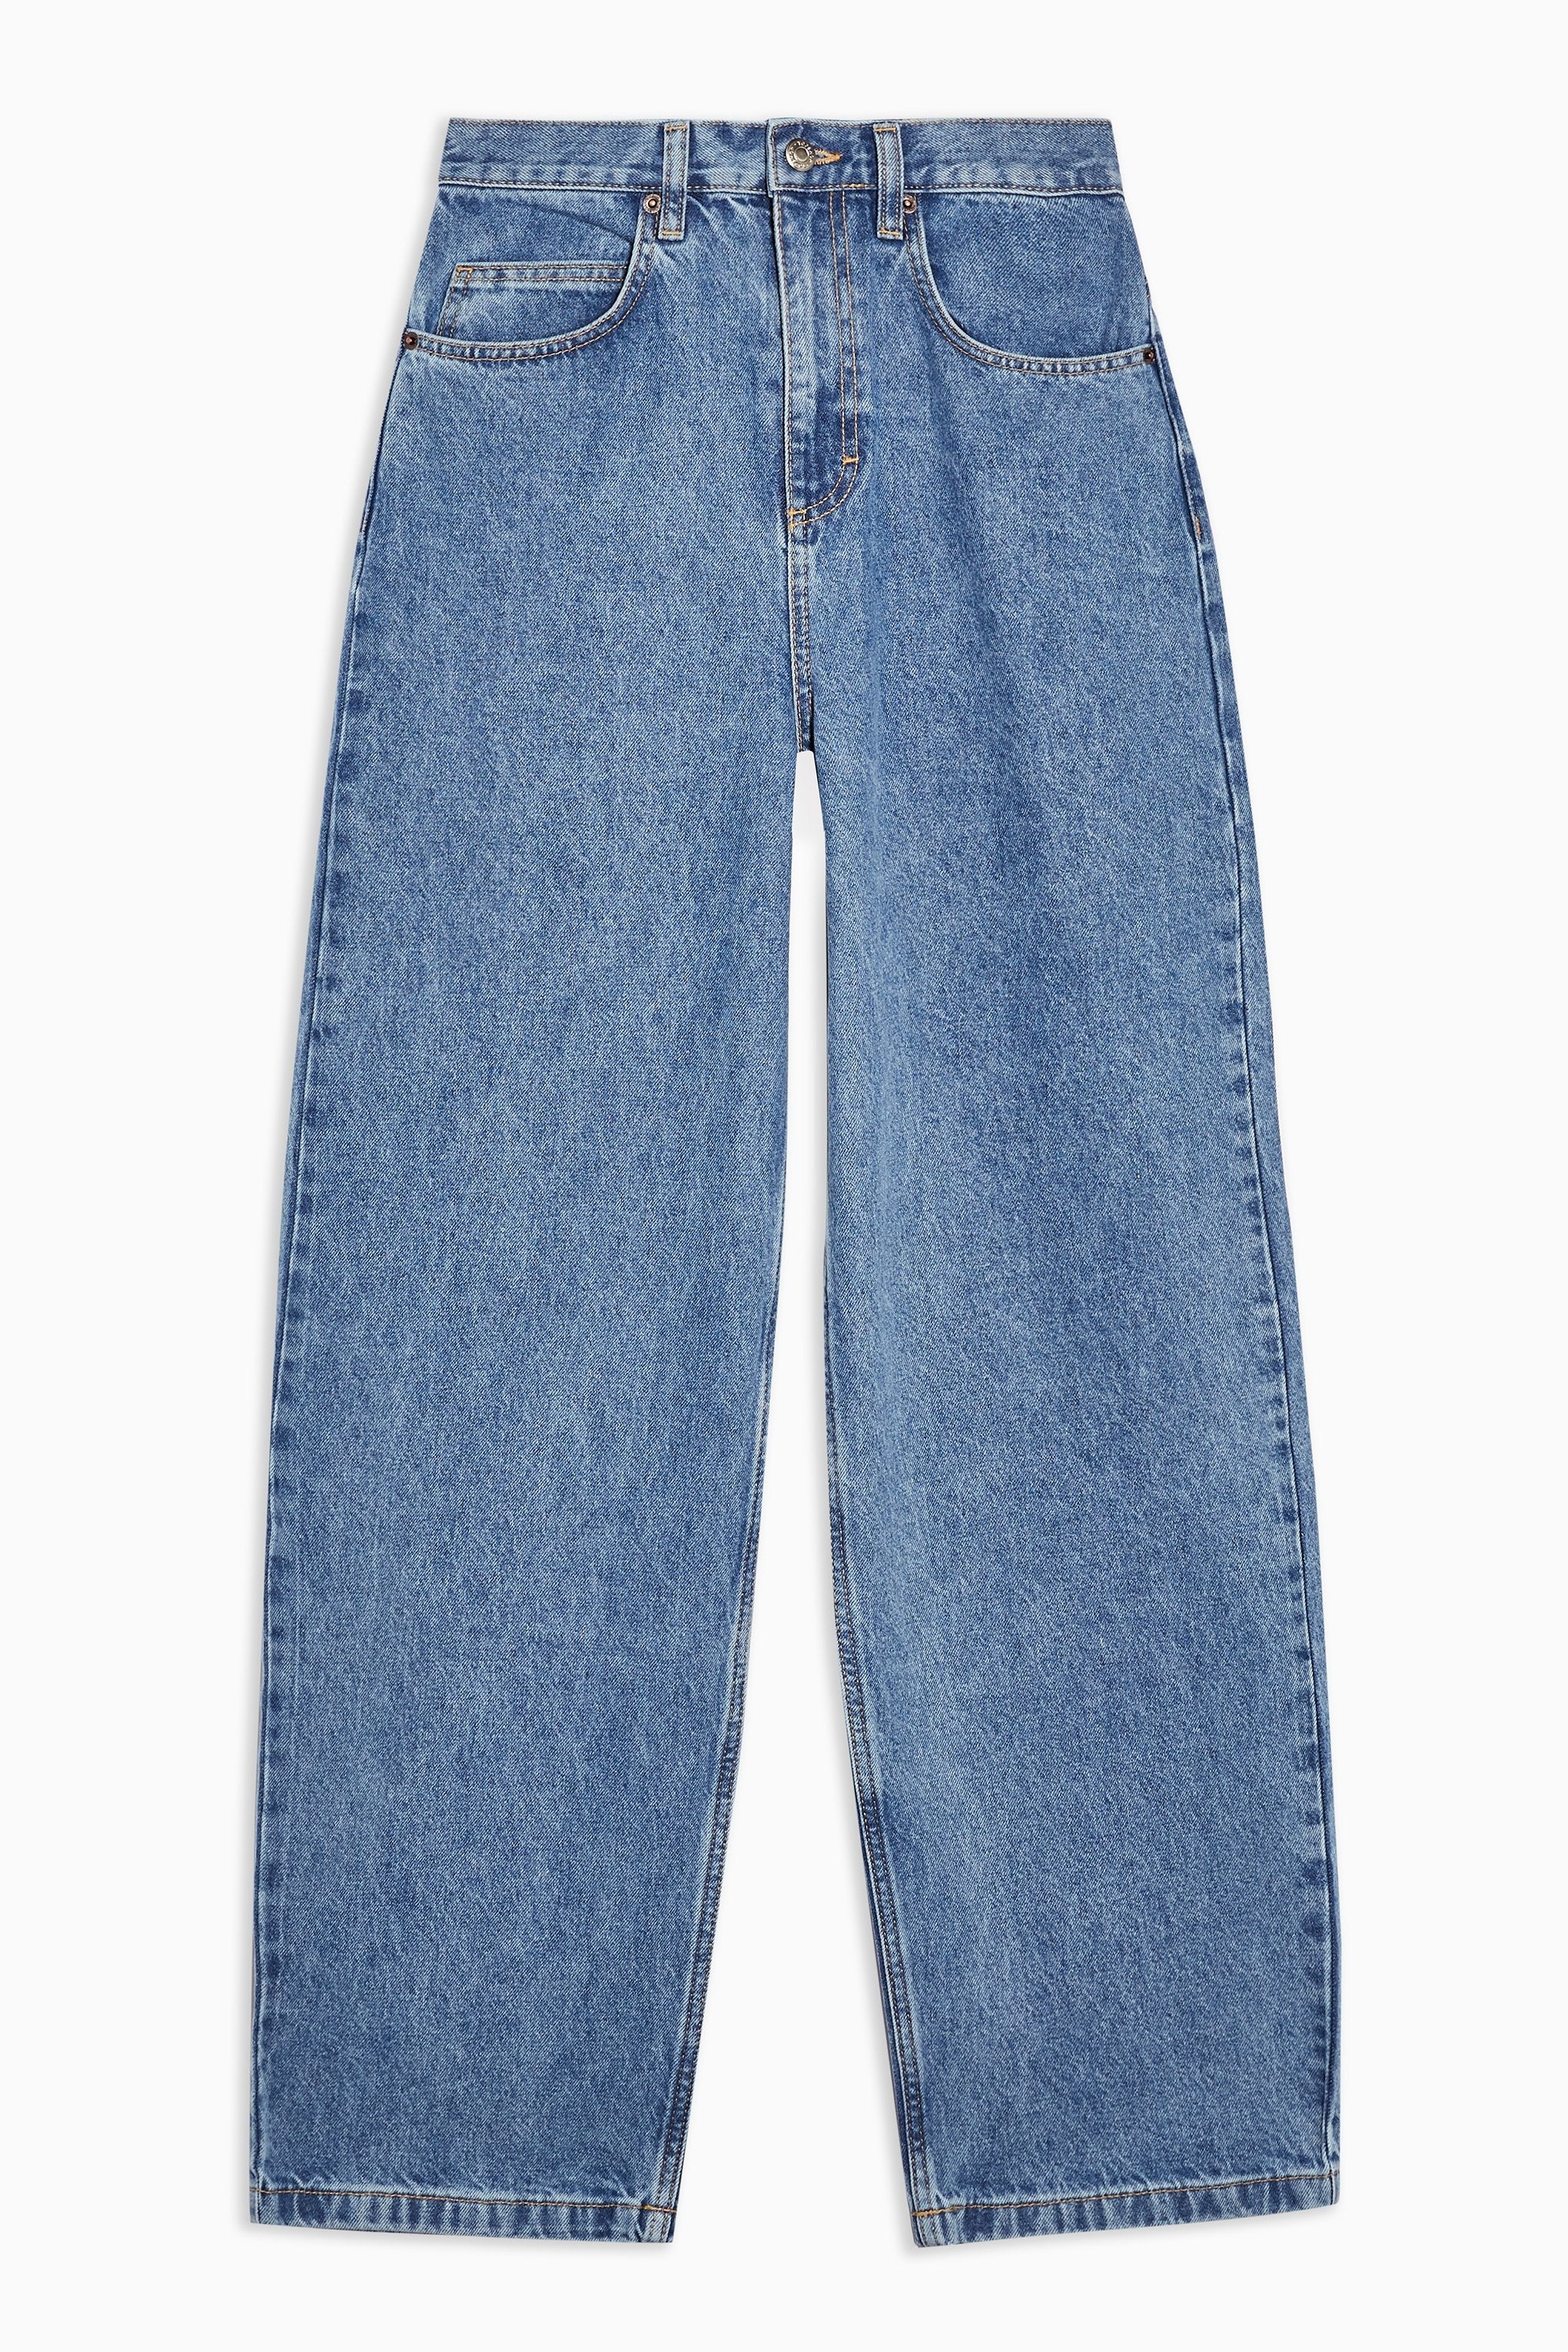 mid blue baggy jeans topshop Off 76%